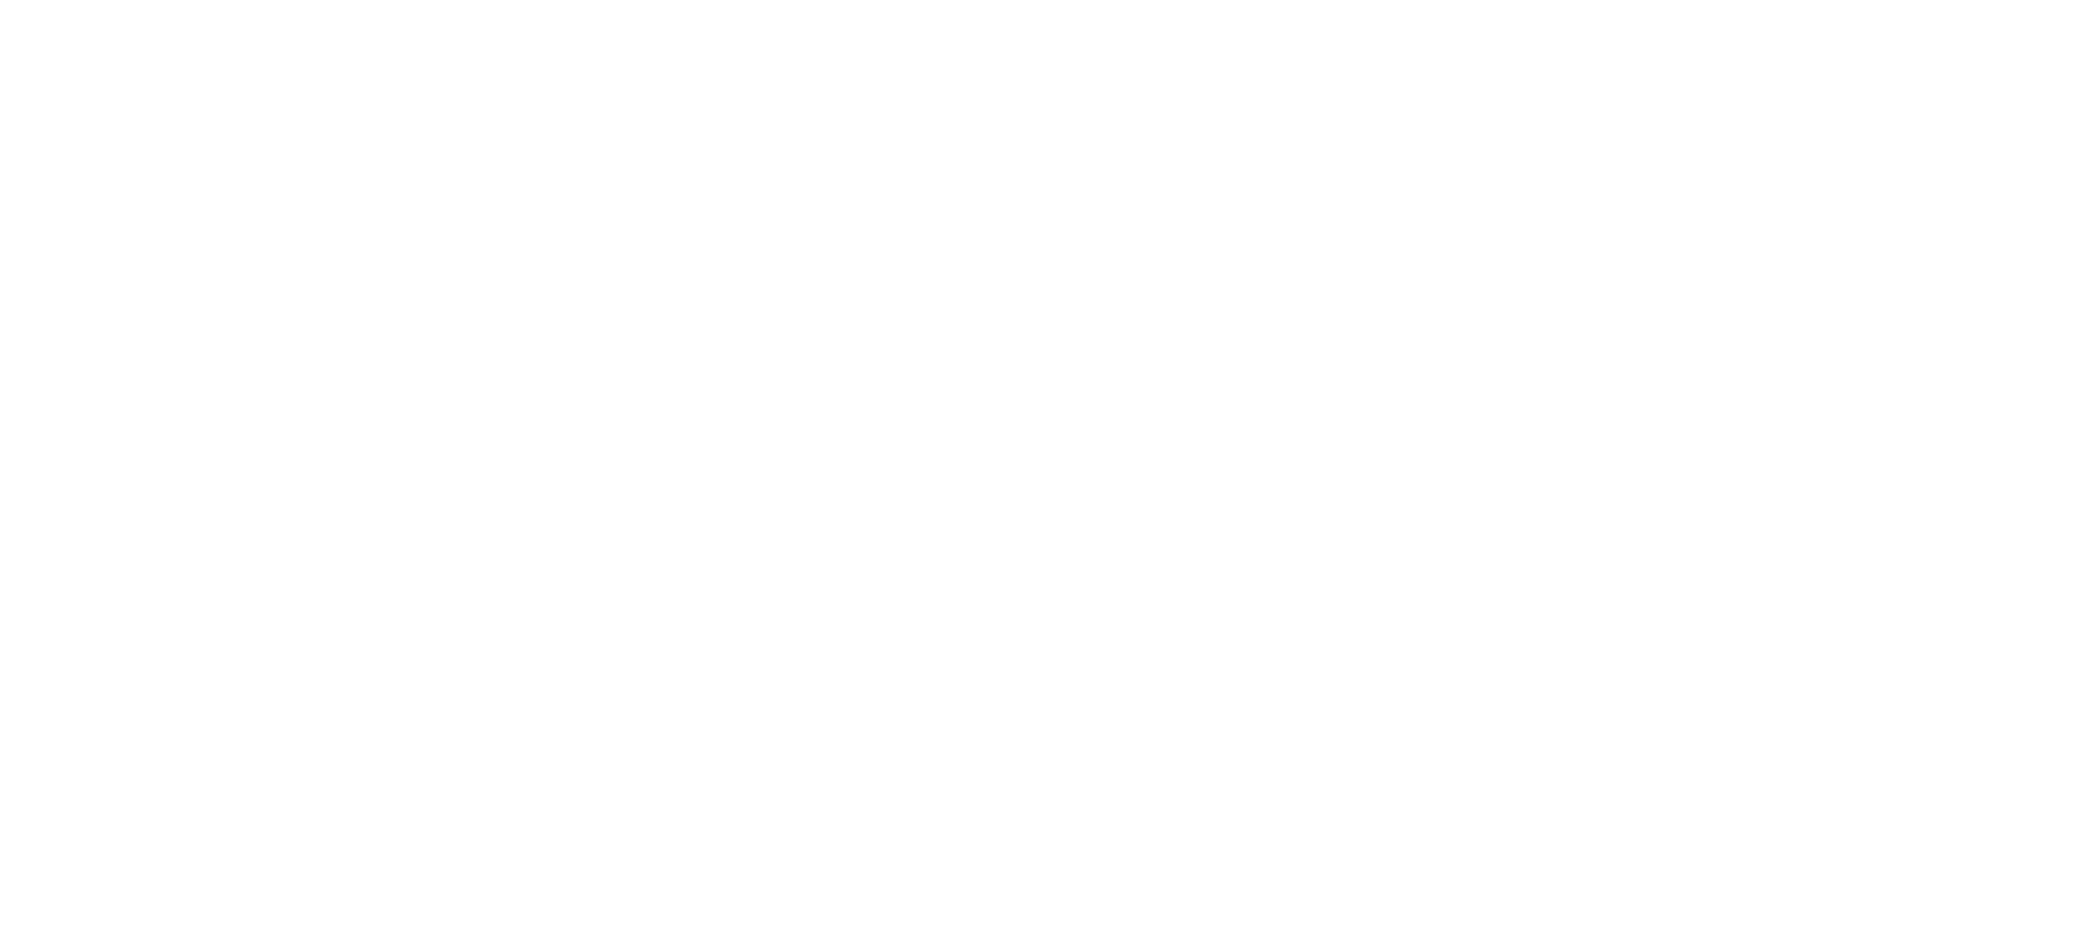 2023 State Standard of Excellence | Results for America